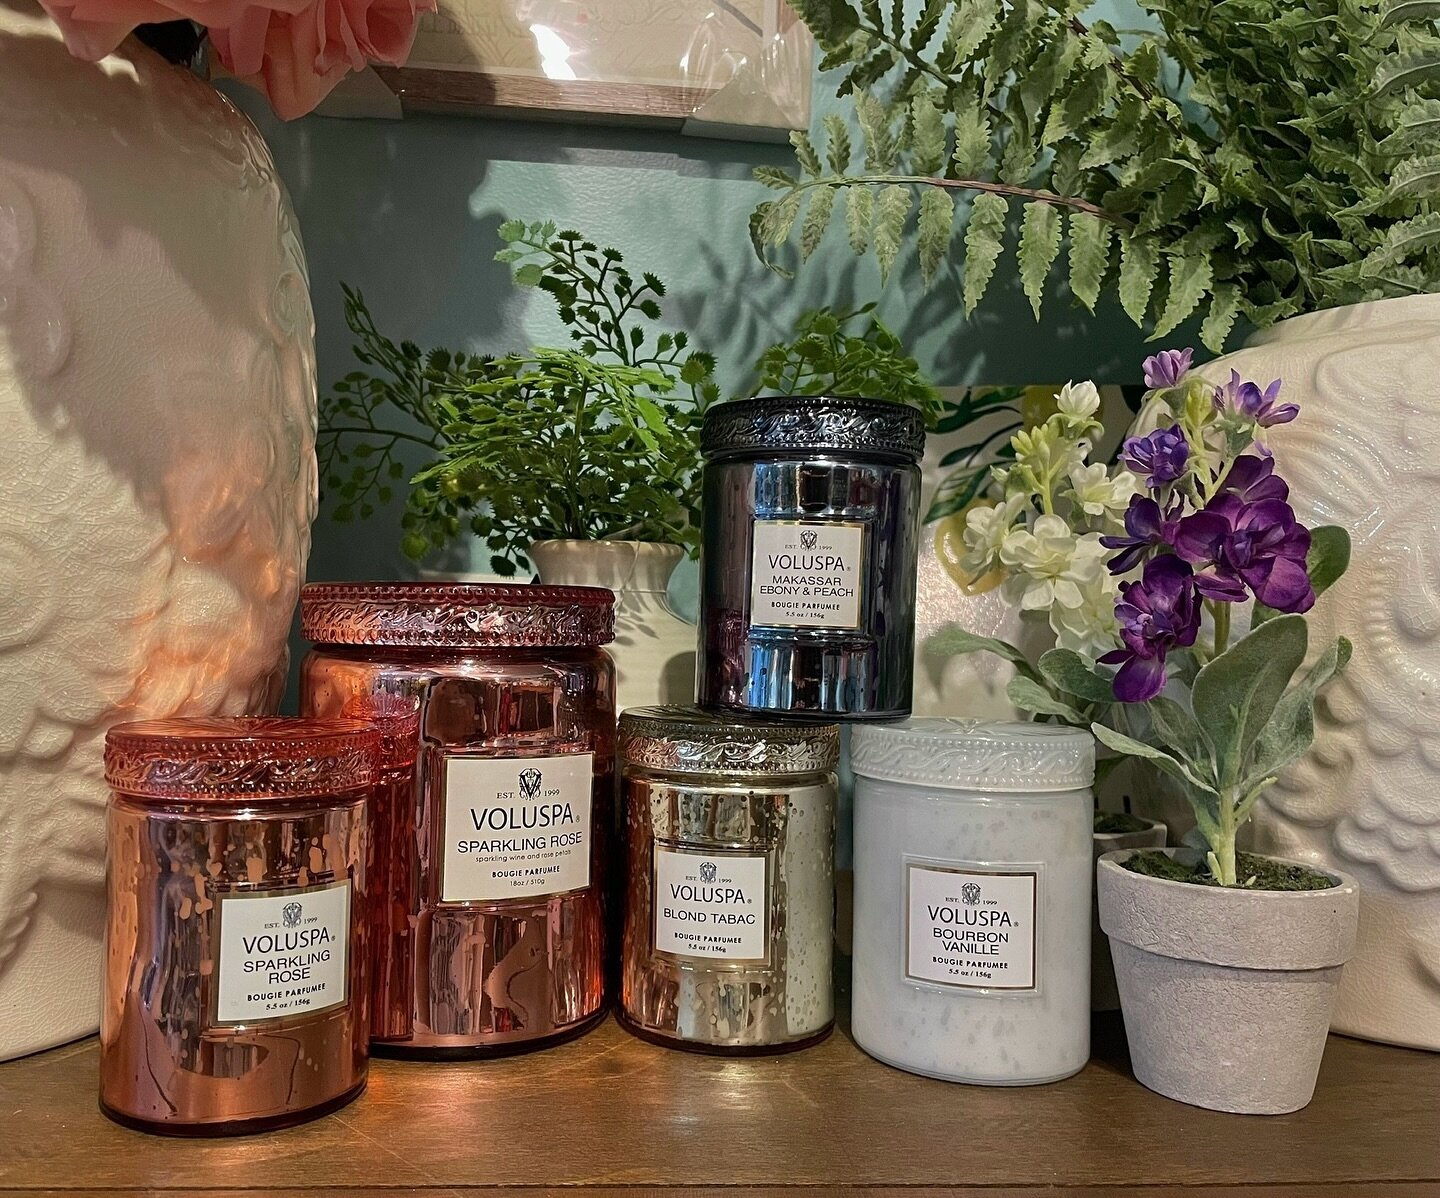 Voluspa&rsquo;s new collection is here! These candles smell like pure royal elegance, and will have you feeling like the royalty you are😉✨
#thequeenscourtclayton 

&bull;
&bull;
&bull;
&bull;

#voluspa #instagood #picoftheday #explore #fyp #photooft